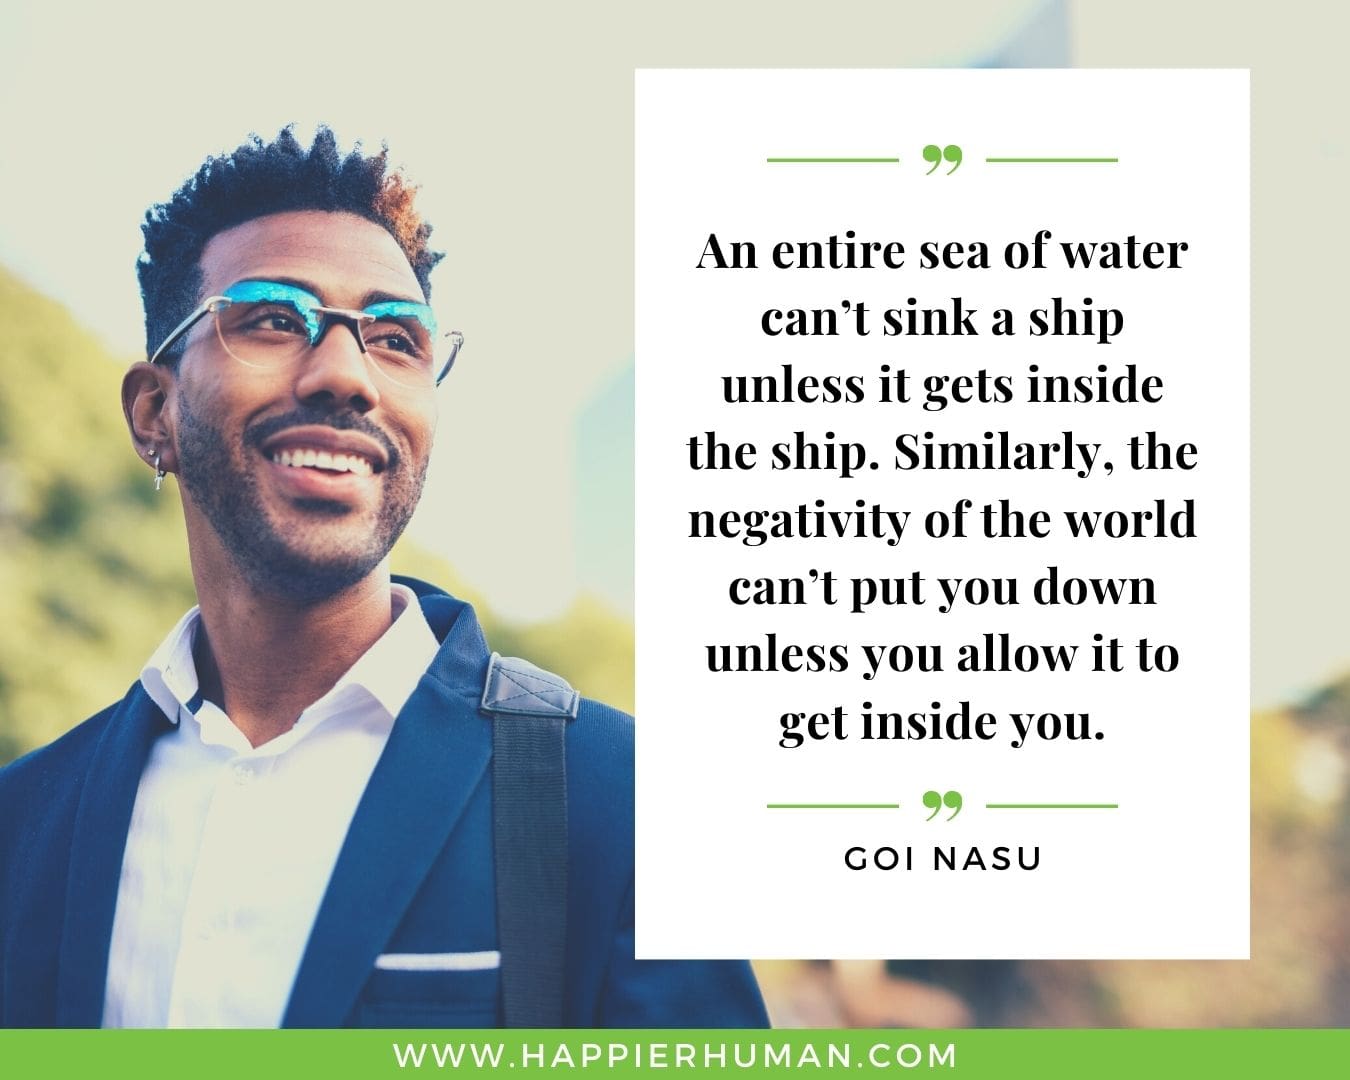 Toxic People Quotes - “An entire sea of water can’t sink a ship unless it gets inside the ship. Similarly, the negativity of the world can’t put you down unless you allow it to get inside you.” – Goi Nasu